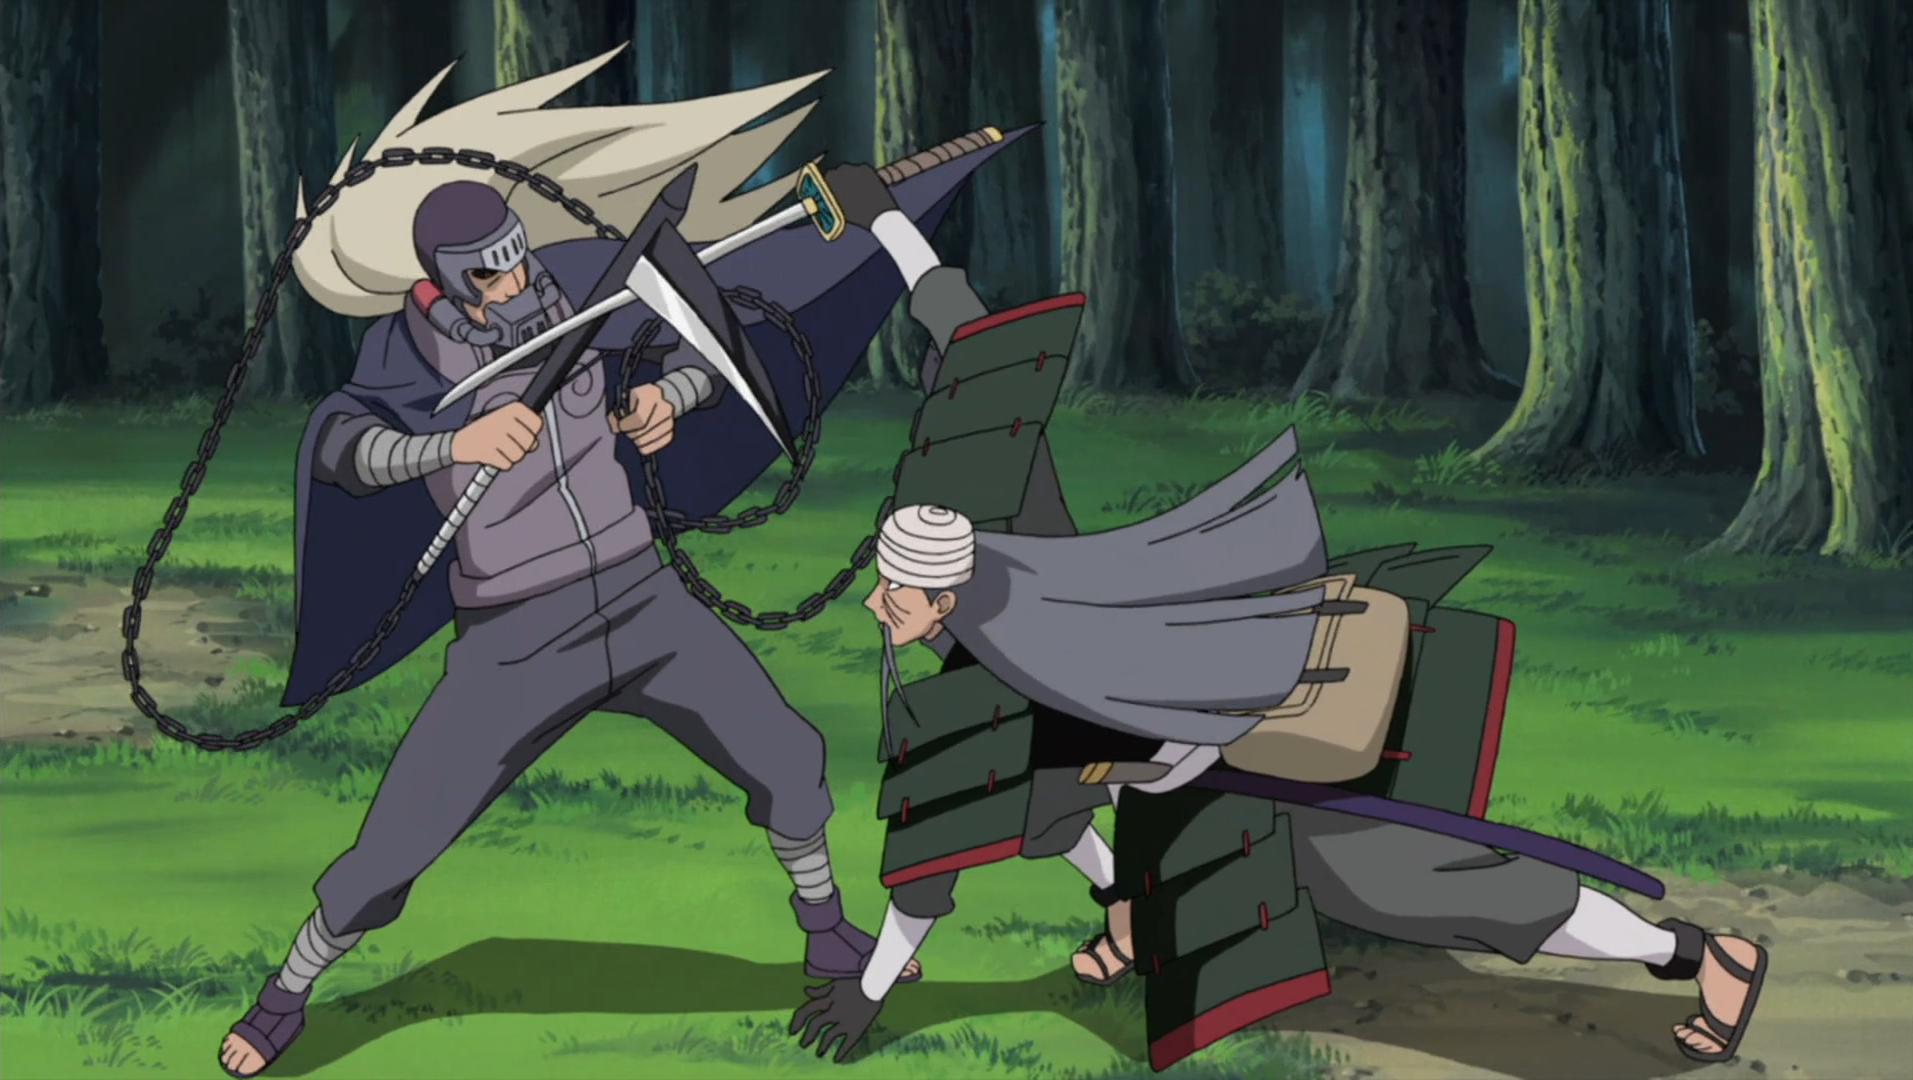 http://images1.wikia.nocookie.net/__cb20120802122635/naruto/images/a/a3/Mifune_counters_Hanzo2.png